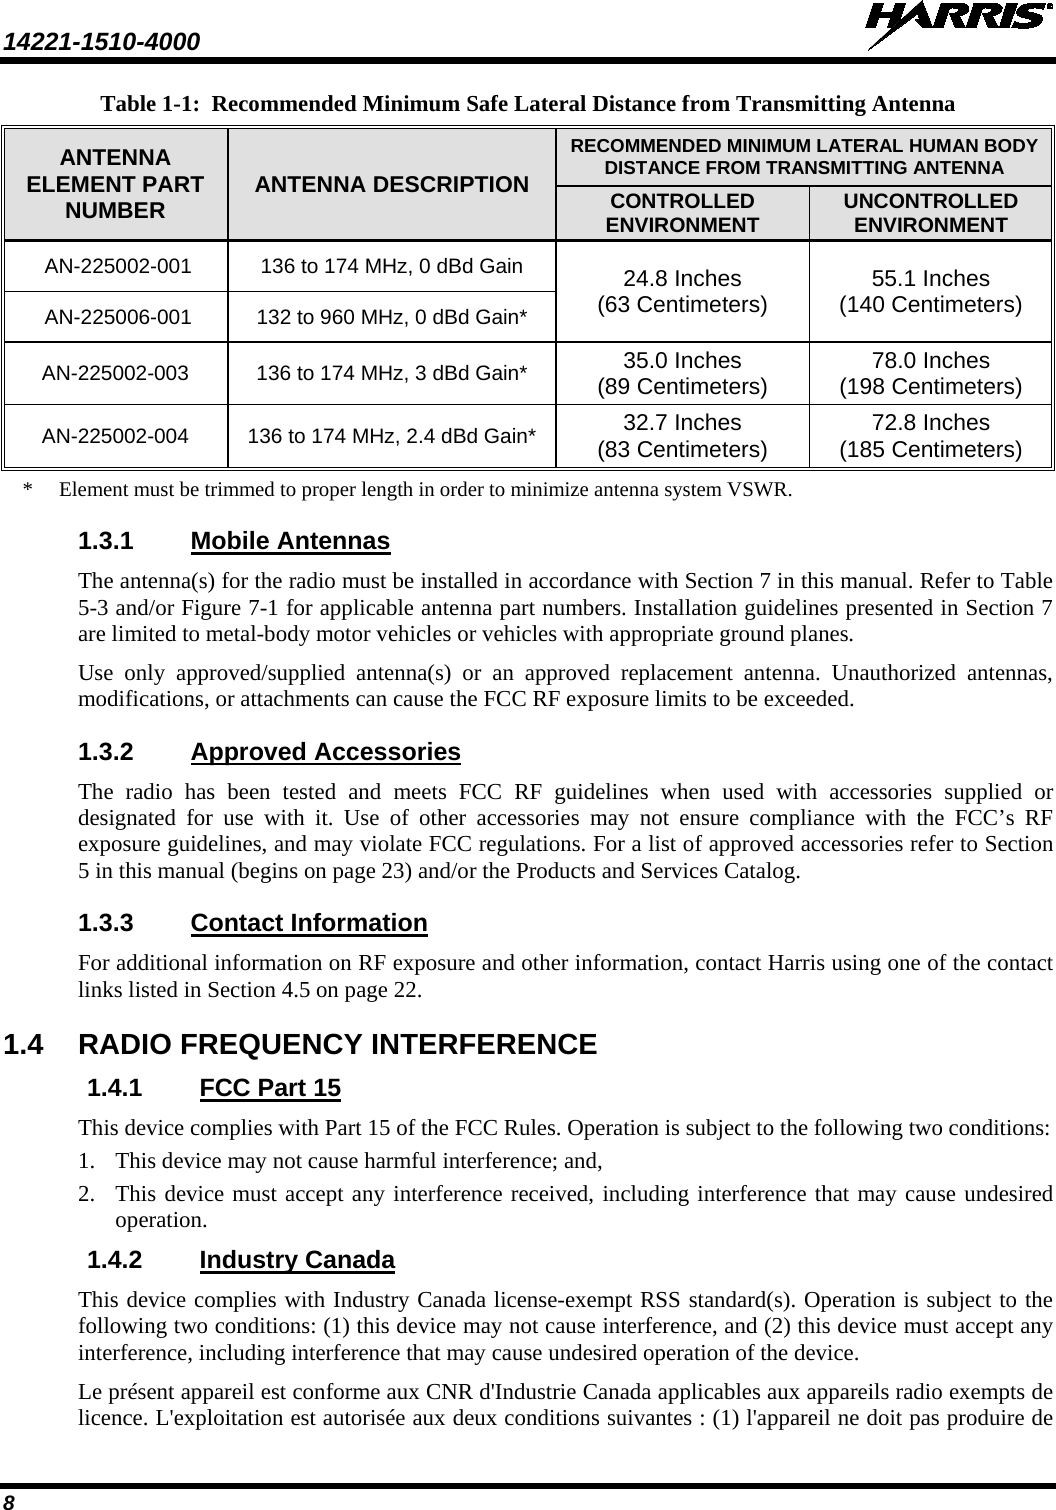 14221-1510-4000   8 Table 1-1:  Recommended Minimum Safe Lateral Distance from Transmitting Antenna ANTENNA ELEMENT PART NUMBER ANTENNA DESCRIPTION RECOMMENDED MINIMUM LATERAL HUMAN BODY DISTANCE FROM TRANSMITTING ANTENNA CONTROLLED ENVIRONMENT UNCONTROLLED ENVIRONMENT  AN-225002-001 136 to 174 MHz, 0 dBd Gain 24.8 Inches (63 Centimeters) 55.1 Inches (140 Centimeters)  AN-225006-001 132 to 960 MHz, 0 dBd Gain* AN-225002-003 136 to 174 MHz, 3 dBd Gain*  35.0 Inches (89 Centimeters) 78.0 Inches (198 Centimeters) AN-225002-004  136 to 174 MHz, 2.4 dBd Gain*  32.7 Inches (83 Centimeters) 72.8 Inches (185 Centimeters) *  Element must be trimmed to proper length in order to minimize antenna system VSWR. 1.3.1 Mobile Antennas The antenna(s) for the radio must be installed in accordance with Section 7 in this manual. Refer to Table 5-3 and/or Figure 7-1 for applicable antenna part numbers. Installation guidelines presented in Section 7 are limited to metal-body motor vehicles or vehicles with appropriate ground planes. Use only approved/supplied antenna(s) or an approved replacement antenna. Unauthorized antennas, modifications, or attachments can cause the FCC RF exposure limits to be exceeded. 1.3.2 Approved Accessories The  radio has been tested and meets FCC RF guidelines when used with accessories supplied or designated for use with it. Use of other accessories may not ensure compliance with the FCC’s RF exposure guidelines, and may violate FCC regulations. For a list of approved accessories refer to Section 5 in this manual (begins on page 23) and/or the Products and Services Catalog. 1.3.3 Contact Information For additional information on RF exposure and other information, contact Harris using one of the contact links listed in Section 4.5 on page 22. 1.4 RADIO FREQUENCY INTERFERENCE 1.4.1 FCC Part 15 This device complies with Part 15 of the FCC Rules. Operation is subject to the following two conditions: 1. This device may not cause harmful interference; and, 2. This device must accept any interference received, including interference that may cause undesired operation. 1.4.2 Industry Canada This device complies with Industry Canada license-exempt RSS standard(s). Operation is subject to the following two conditions: (1) this device may not cause interference, and (2) this device must accept any interference, including interference that may cause undesired operation of the device. Le présent appareil est conforme aux CNR d&apos;Industrie Canada applicables aux appareils radio exempts de licence. L&apos;exploitation est autorisée aux deux conditions suivantes : (1) l&apos;appareil ne doit pas produire de 